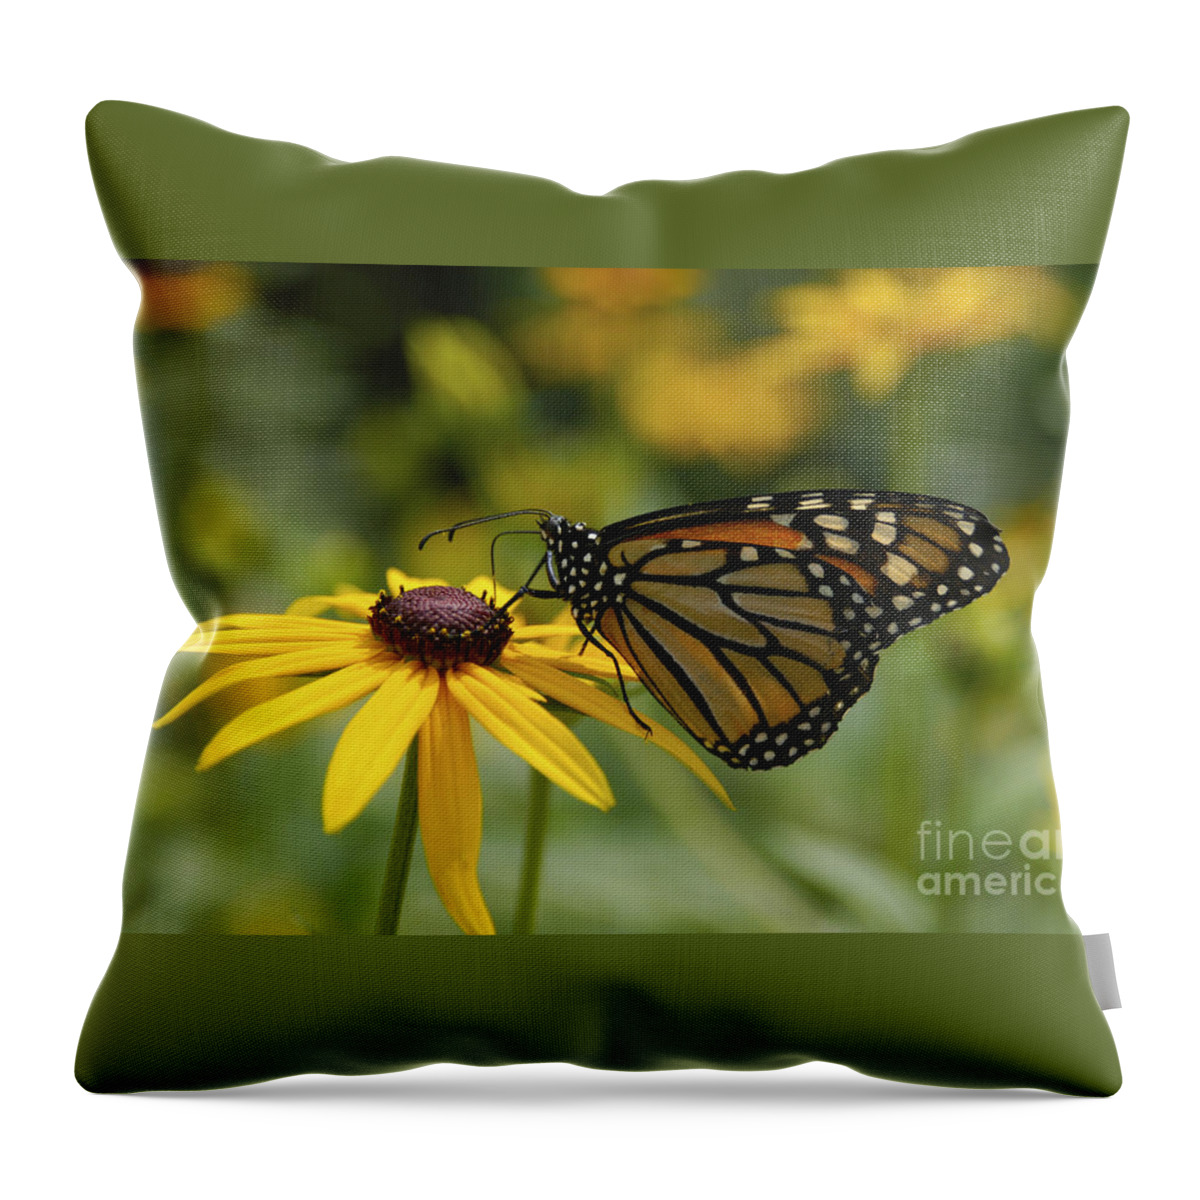 Monarch Butterfly Throw Pillow featuring the photograph Monarch Butterfly by Anthony Sacco